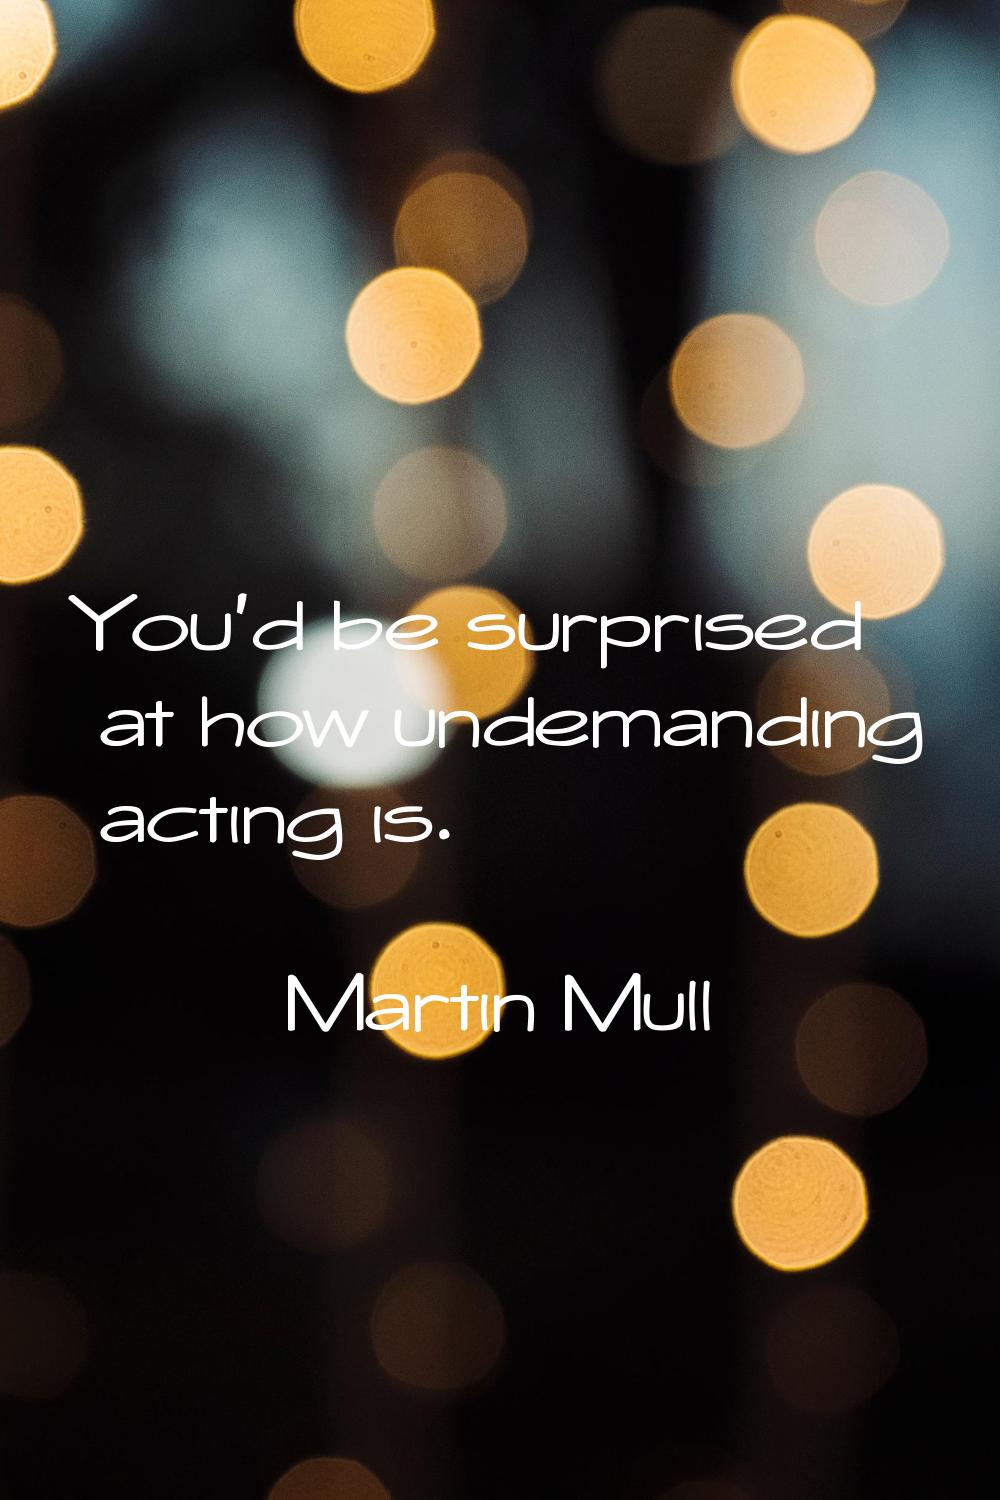 You'd be surprised at how undemanding acting is.